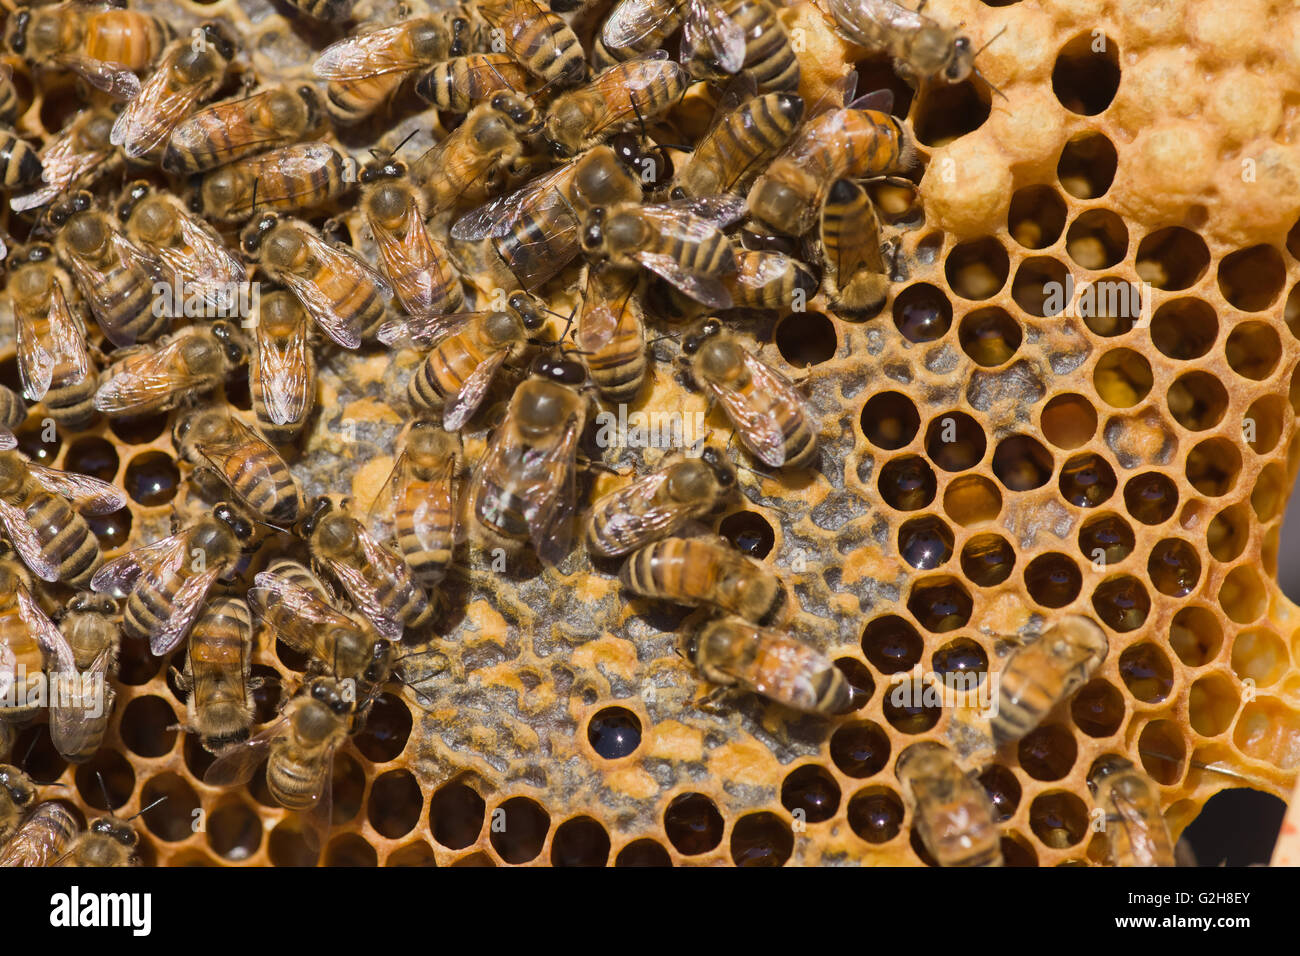 Close-up of frame showing two drone honeybees on the middle of the frame, along with other worker honeybees, honey and pupae Stock Photo